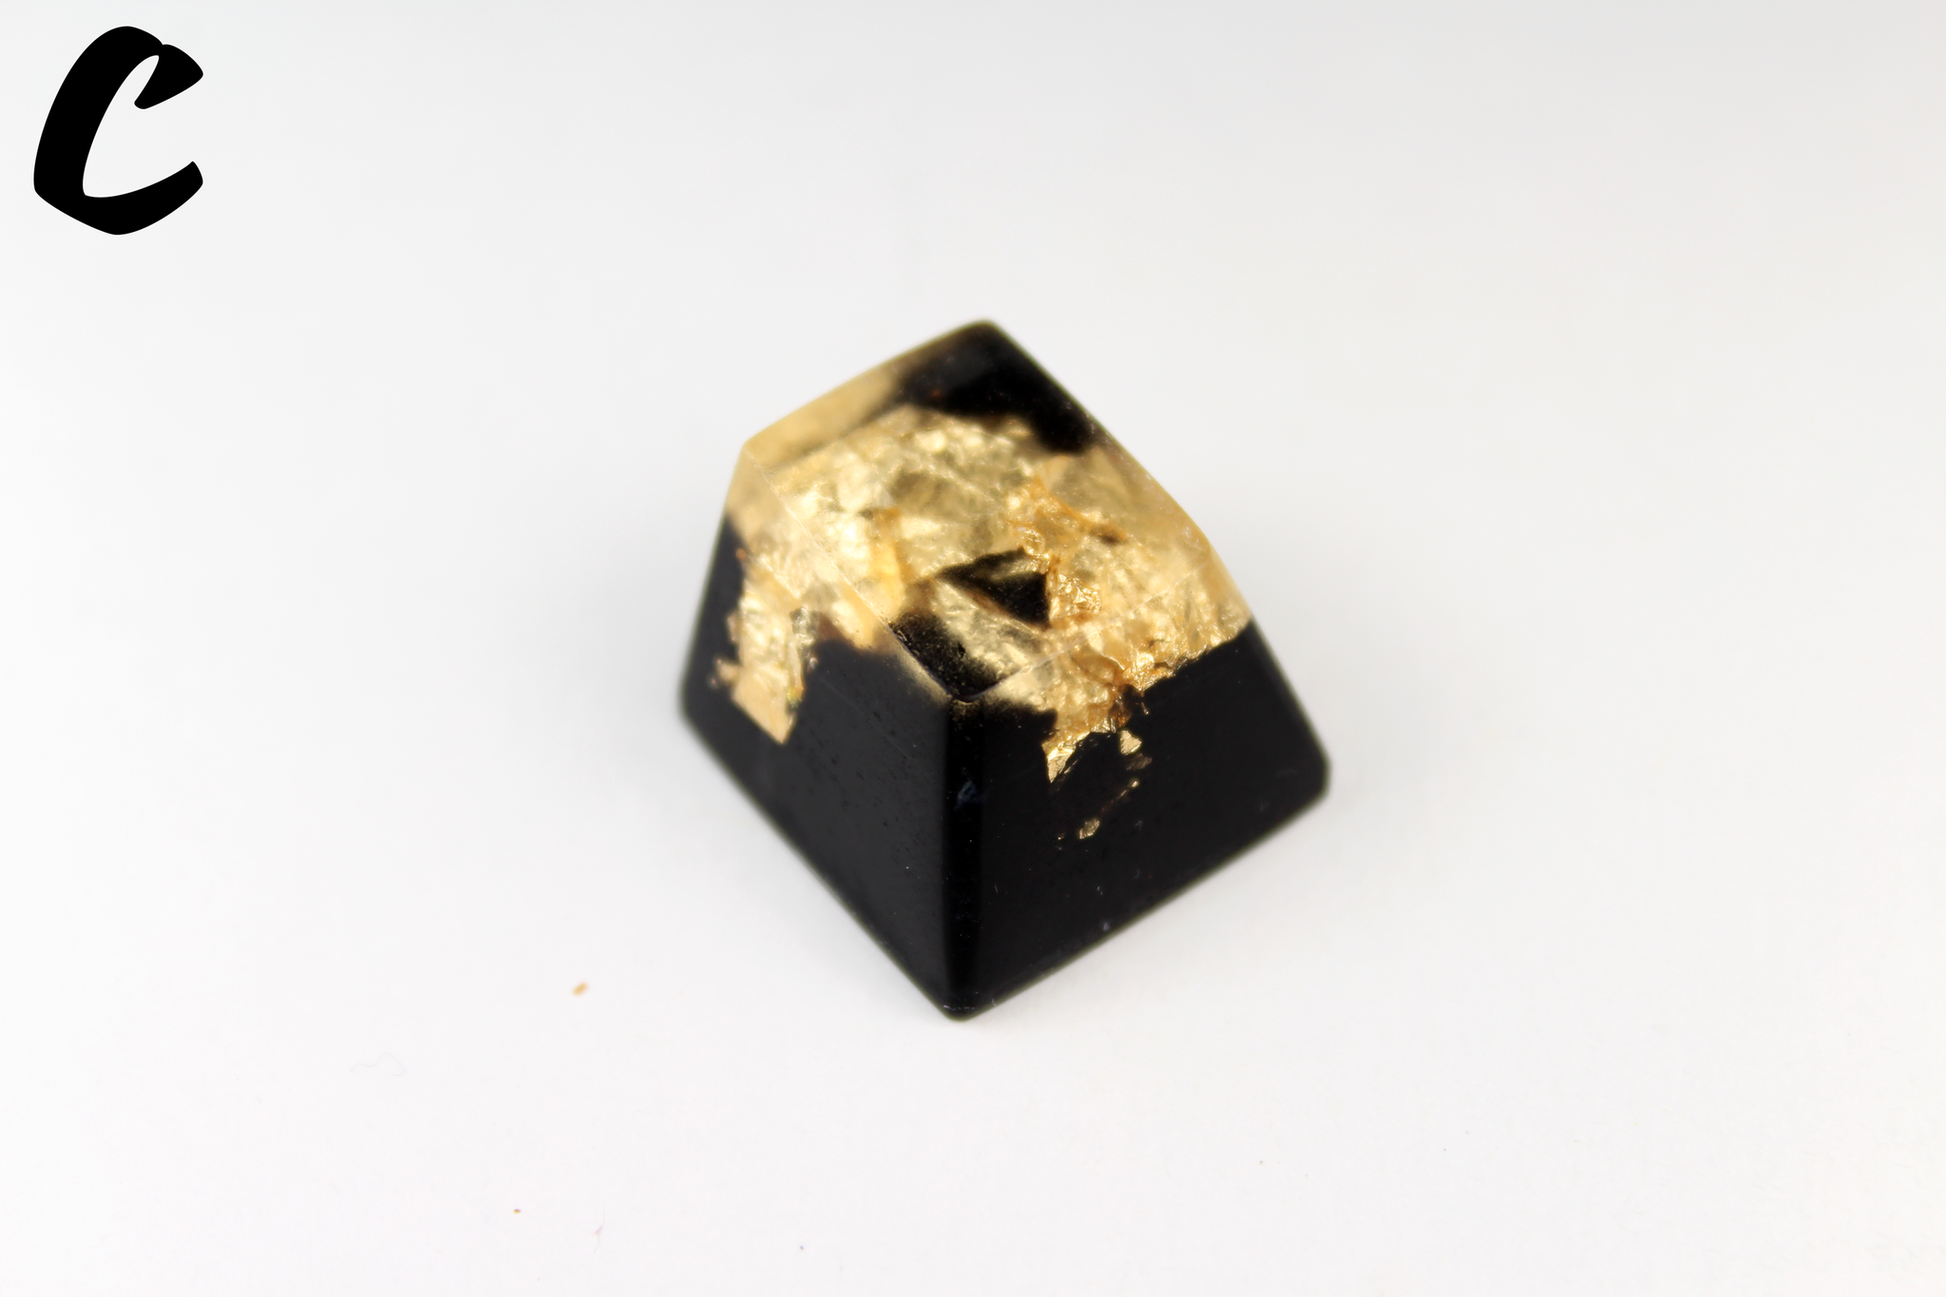 Chaos Caps 1.1 - Gold Flake - PrimeCaps Keycap - Blank and Sculpted Artisan Keycaps for cherry MX mechanical keyboards 